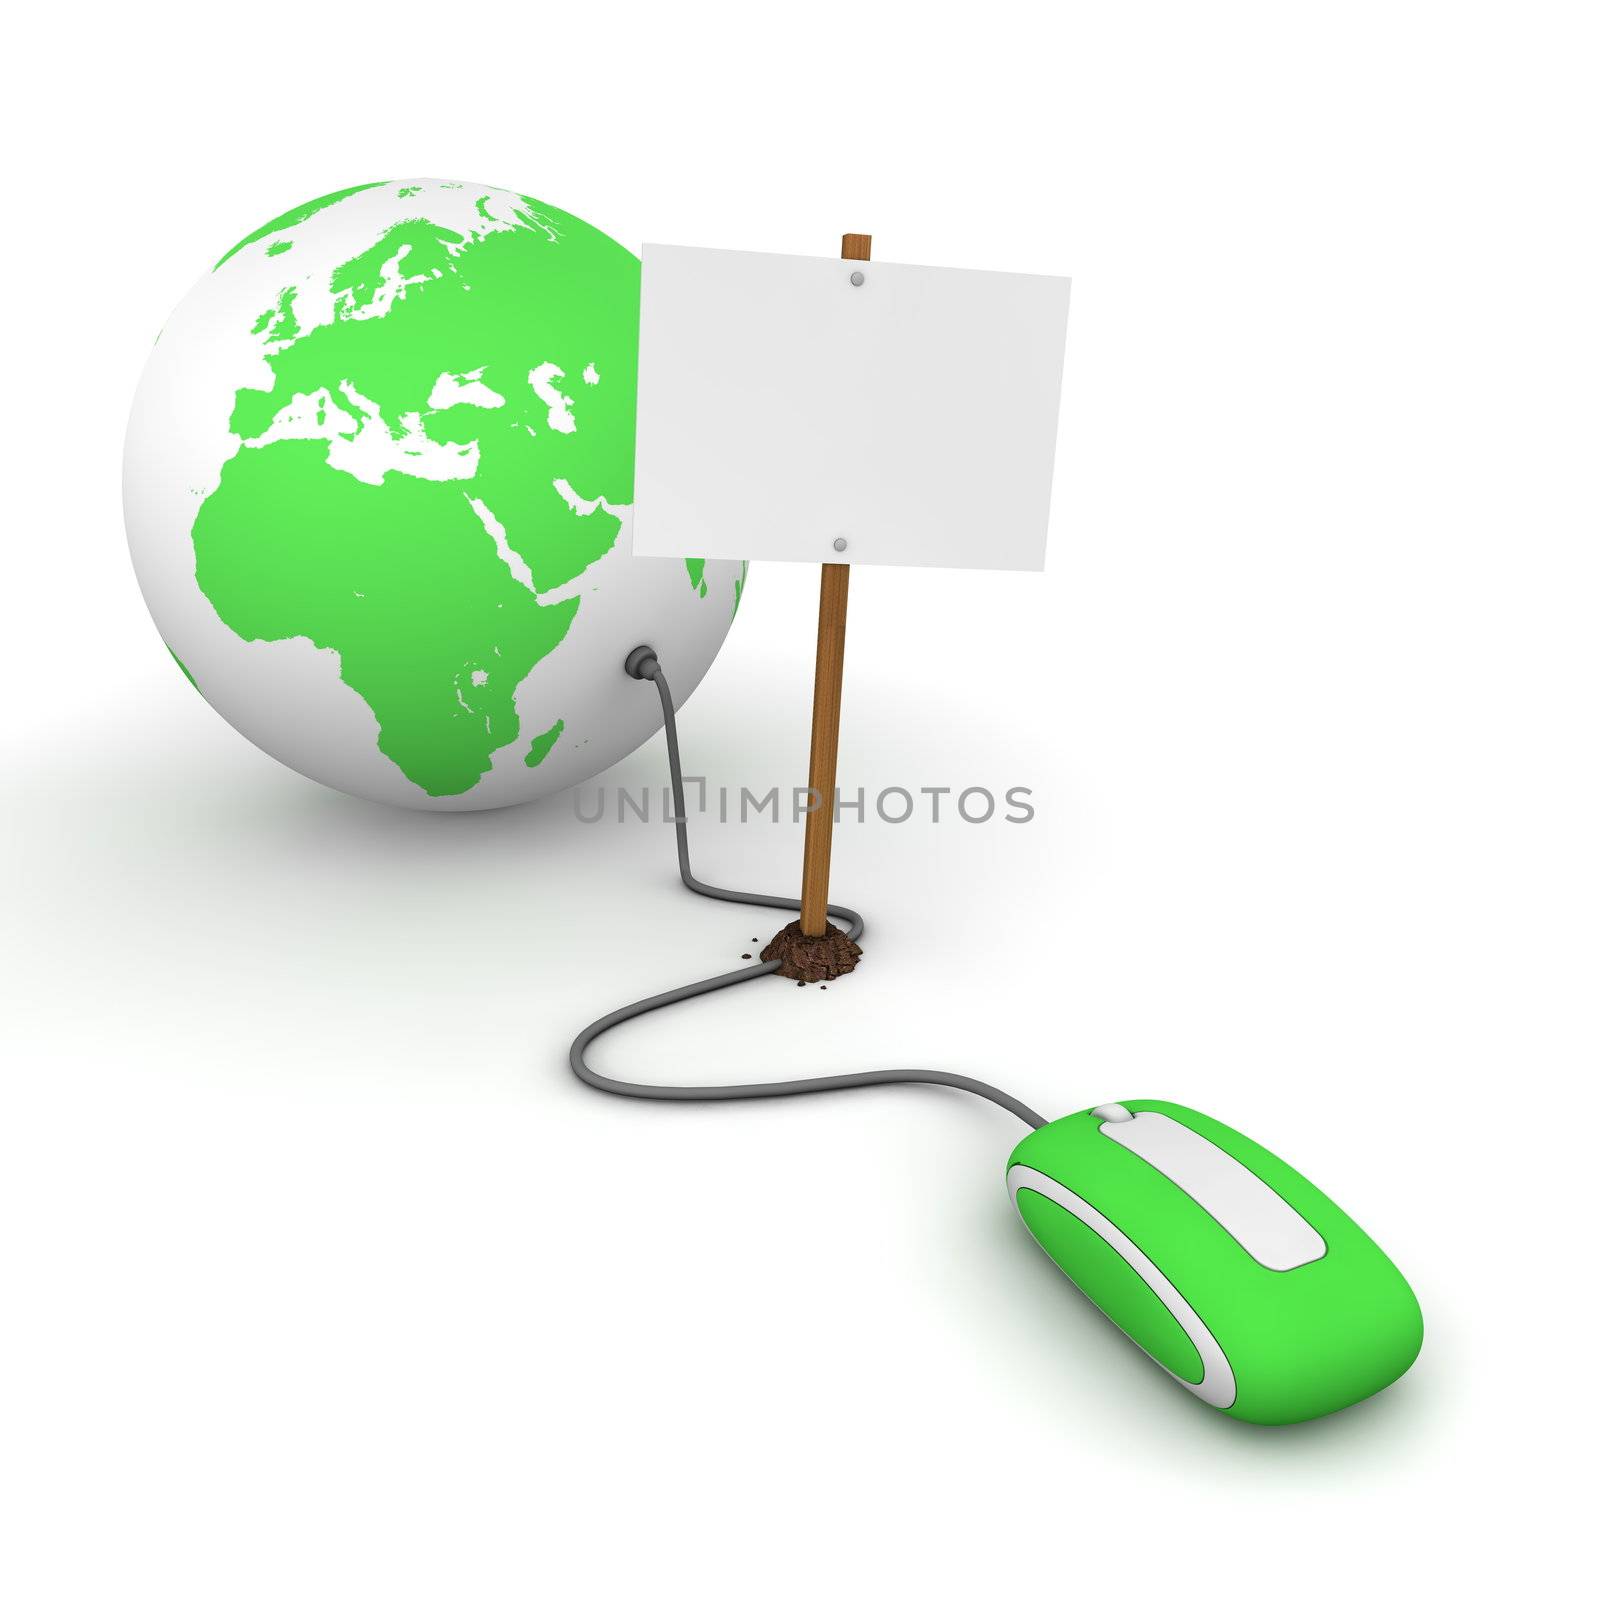 green computer mouse is connected to a green globe - surfing and browsing is blocked by a white rectangular sign that cuts the cable - empty template